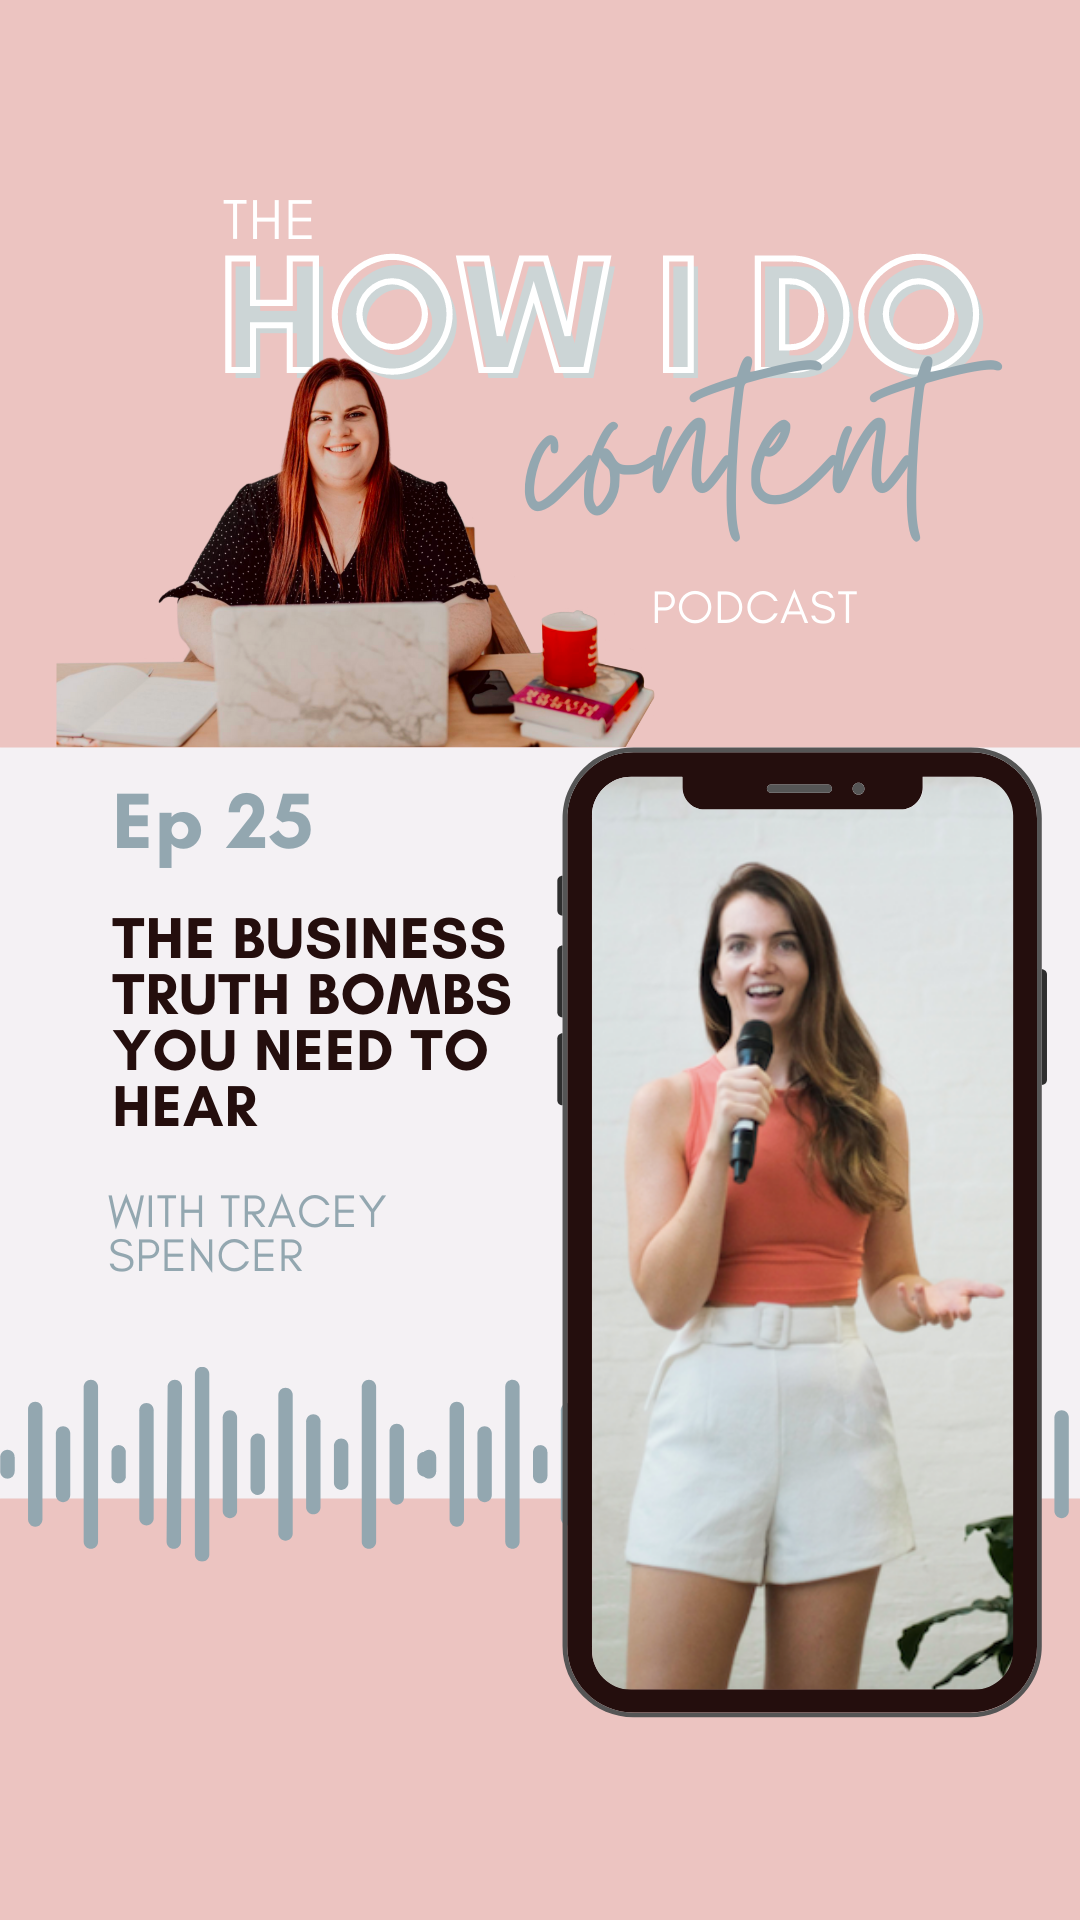 business truth bombs tracey spencer the social bolt how i do content podcast